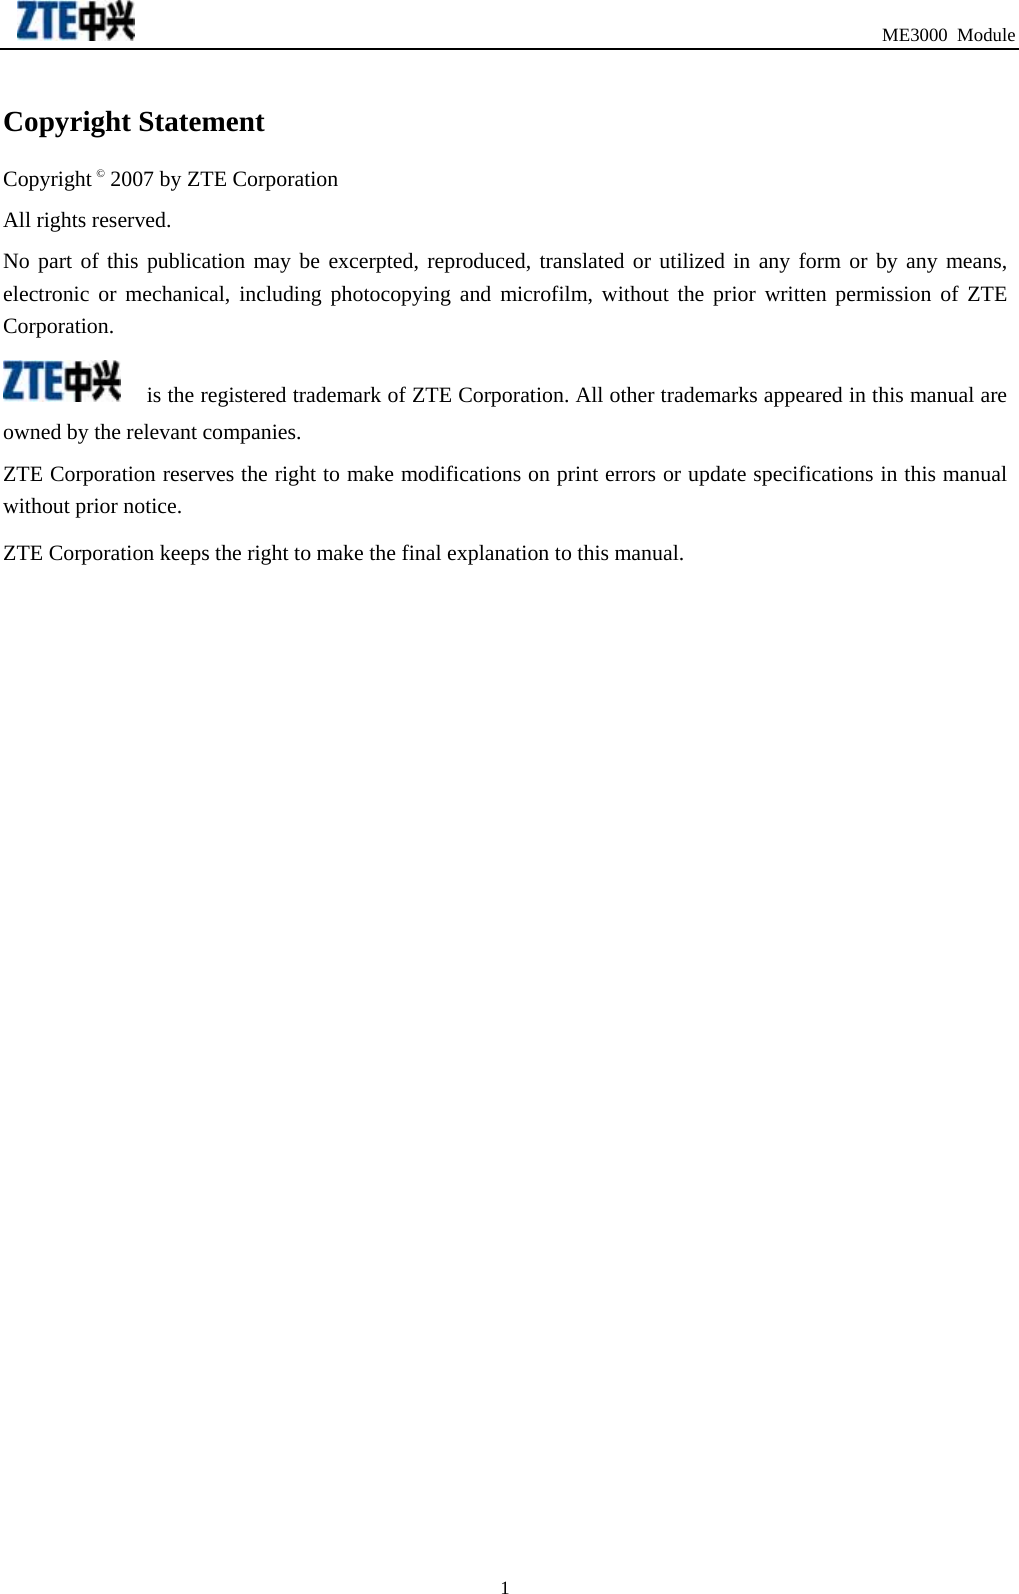                                                                               ME3000 Module Copyright Statement Copyright © 2007 by ZTE Corporation All rights reserved. No part of this publication may be excerpted, reproduced, translated or utilized in any form or by any means, electronic or mechanical, including photocopying and microfilm, without the prior written permission of ZTE Corporation.  is the registered trademark of ZTE Corporation. All other trademarks appeared in this manual are owned by the relevant companies. ZTE Corporation reserves the right to make modifications on print errors or update specifications in this manual without prior notice.   ZTE Corporation keeps the right to make the final explanation to this manual.  1